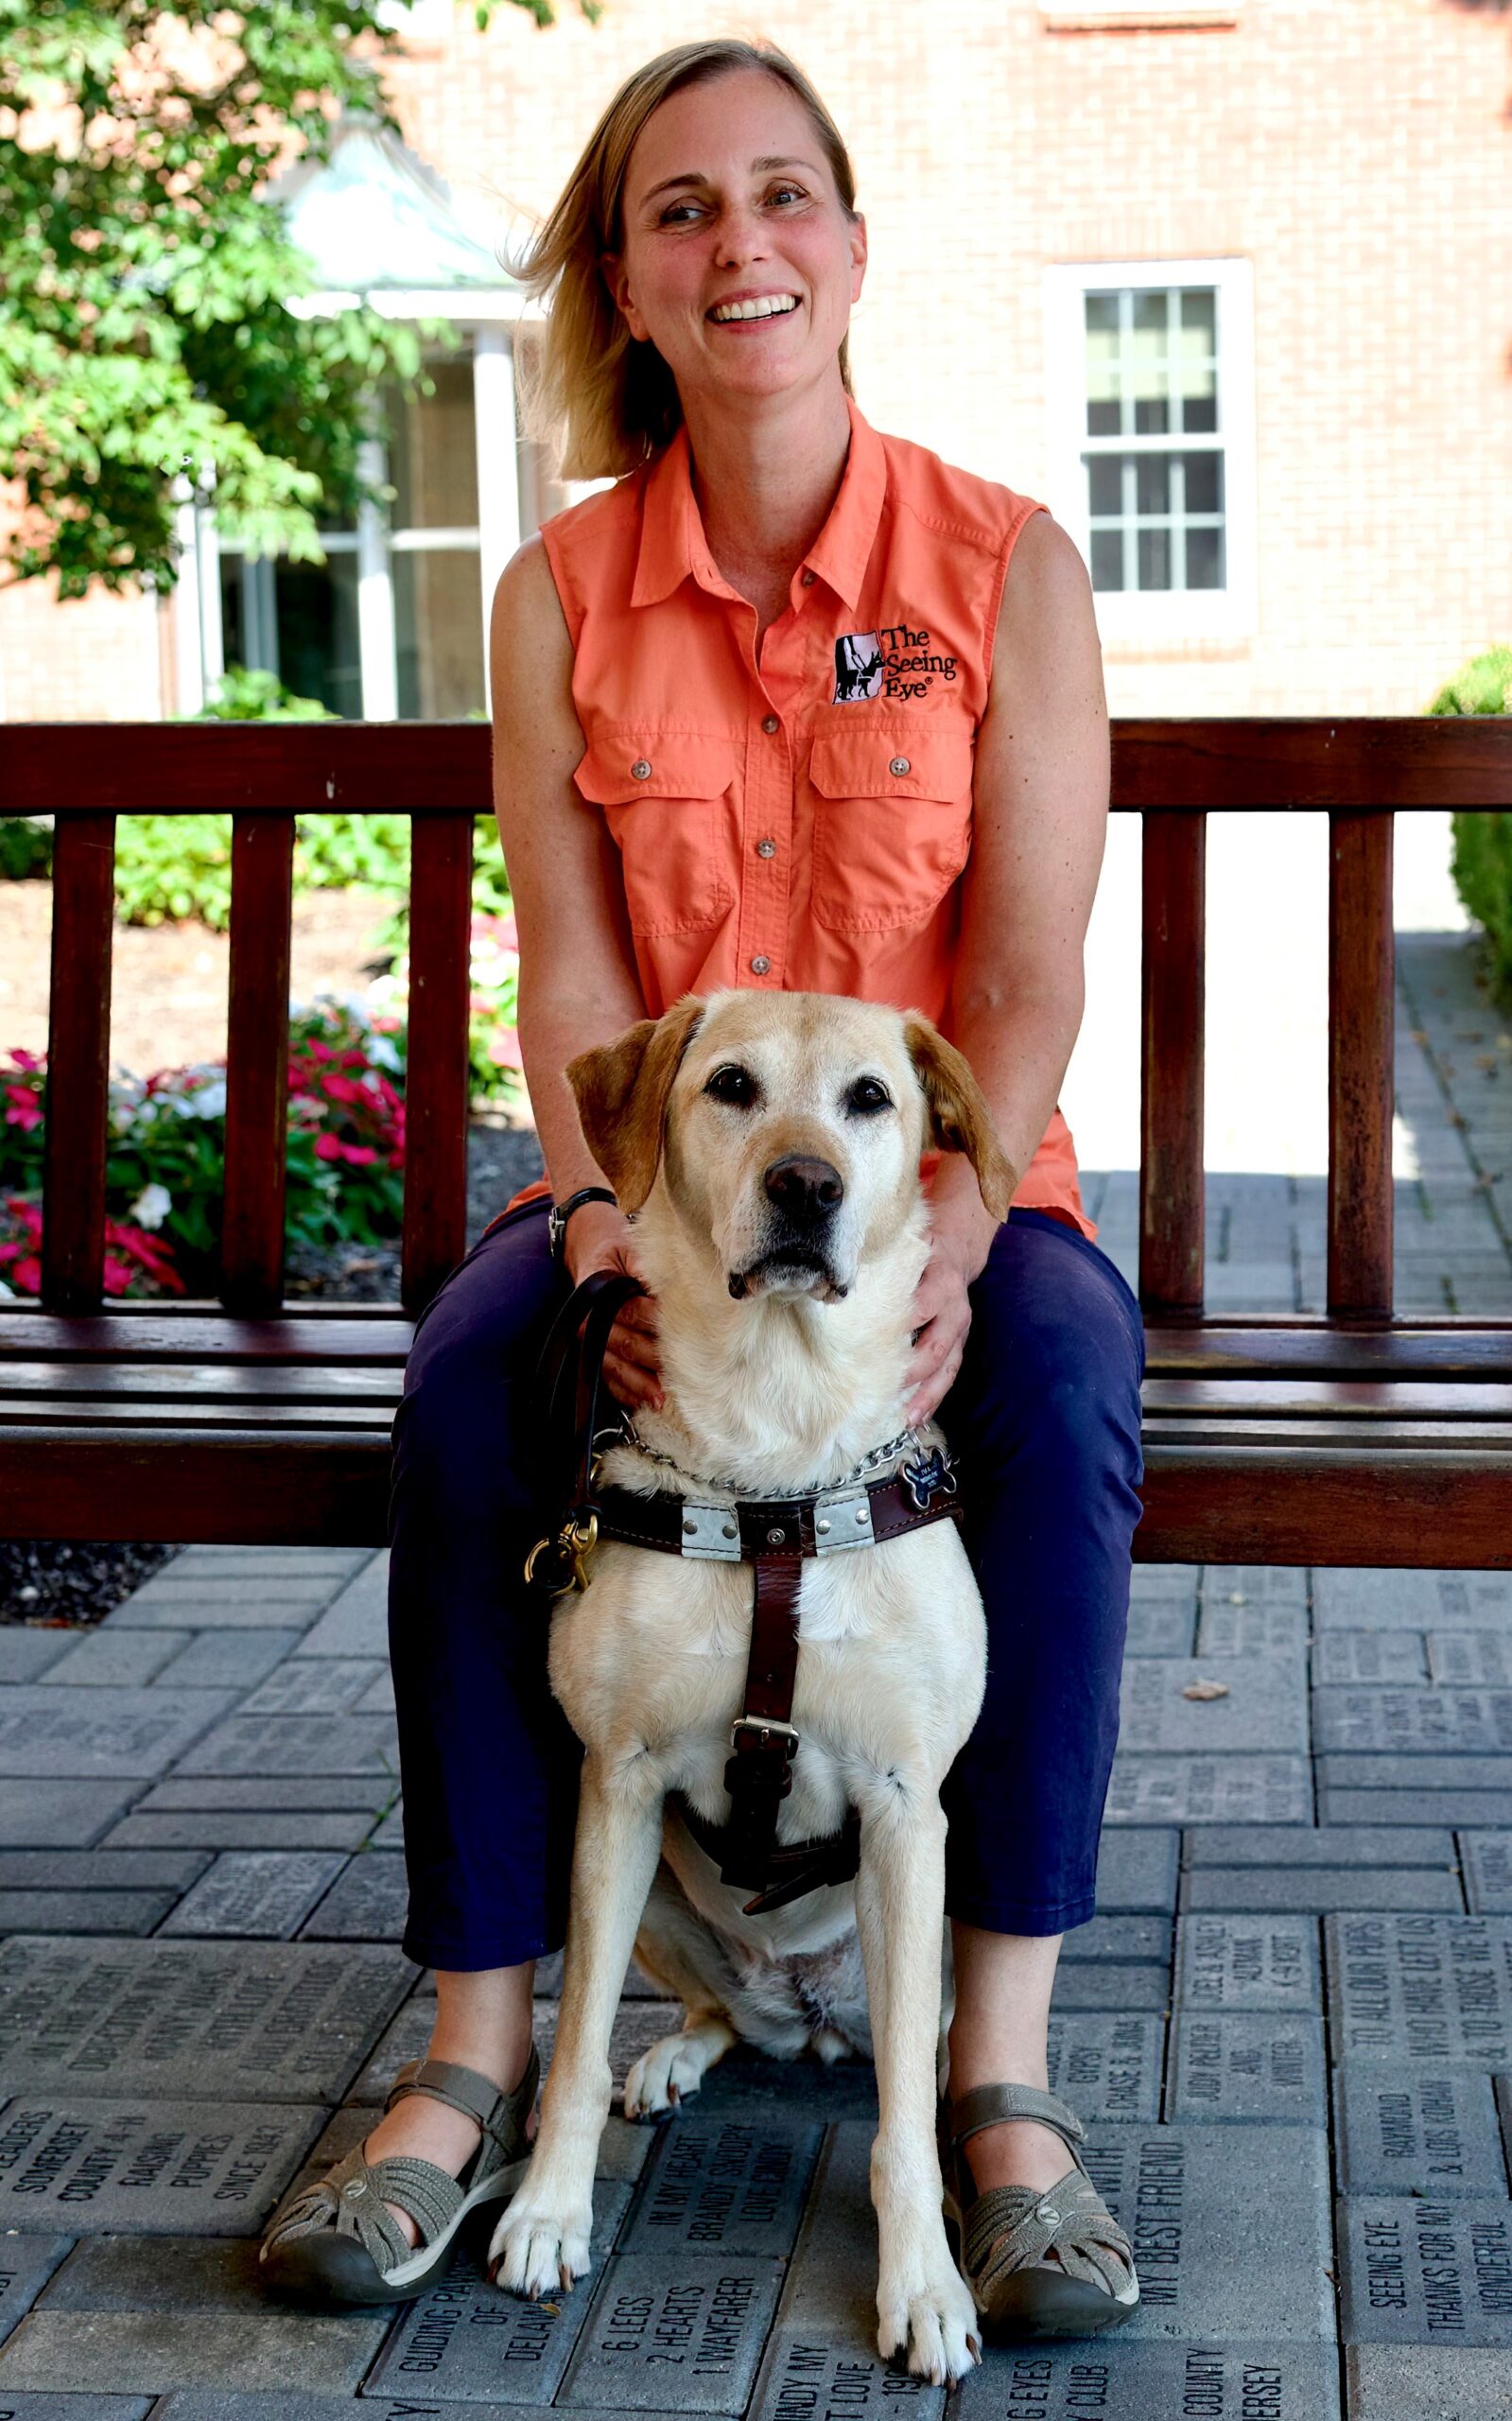 Melissa Allman sits on a bench, wind in her hair, with a smile on her face. She is wearing a slamon tank top and blue pants. Her service dog, Luna, sits at attention between her knees. Luna is a Golden Retriever, wearing a brown harness